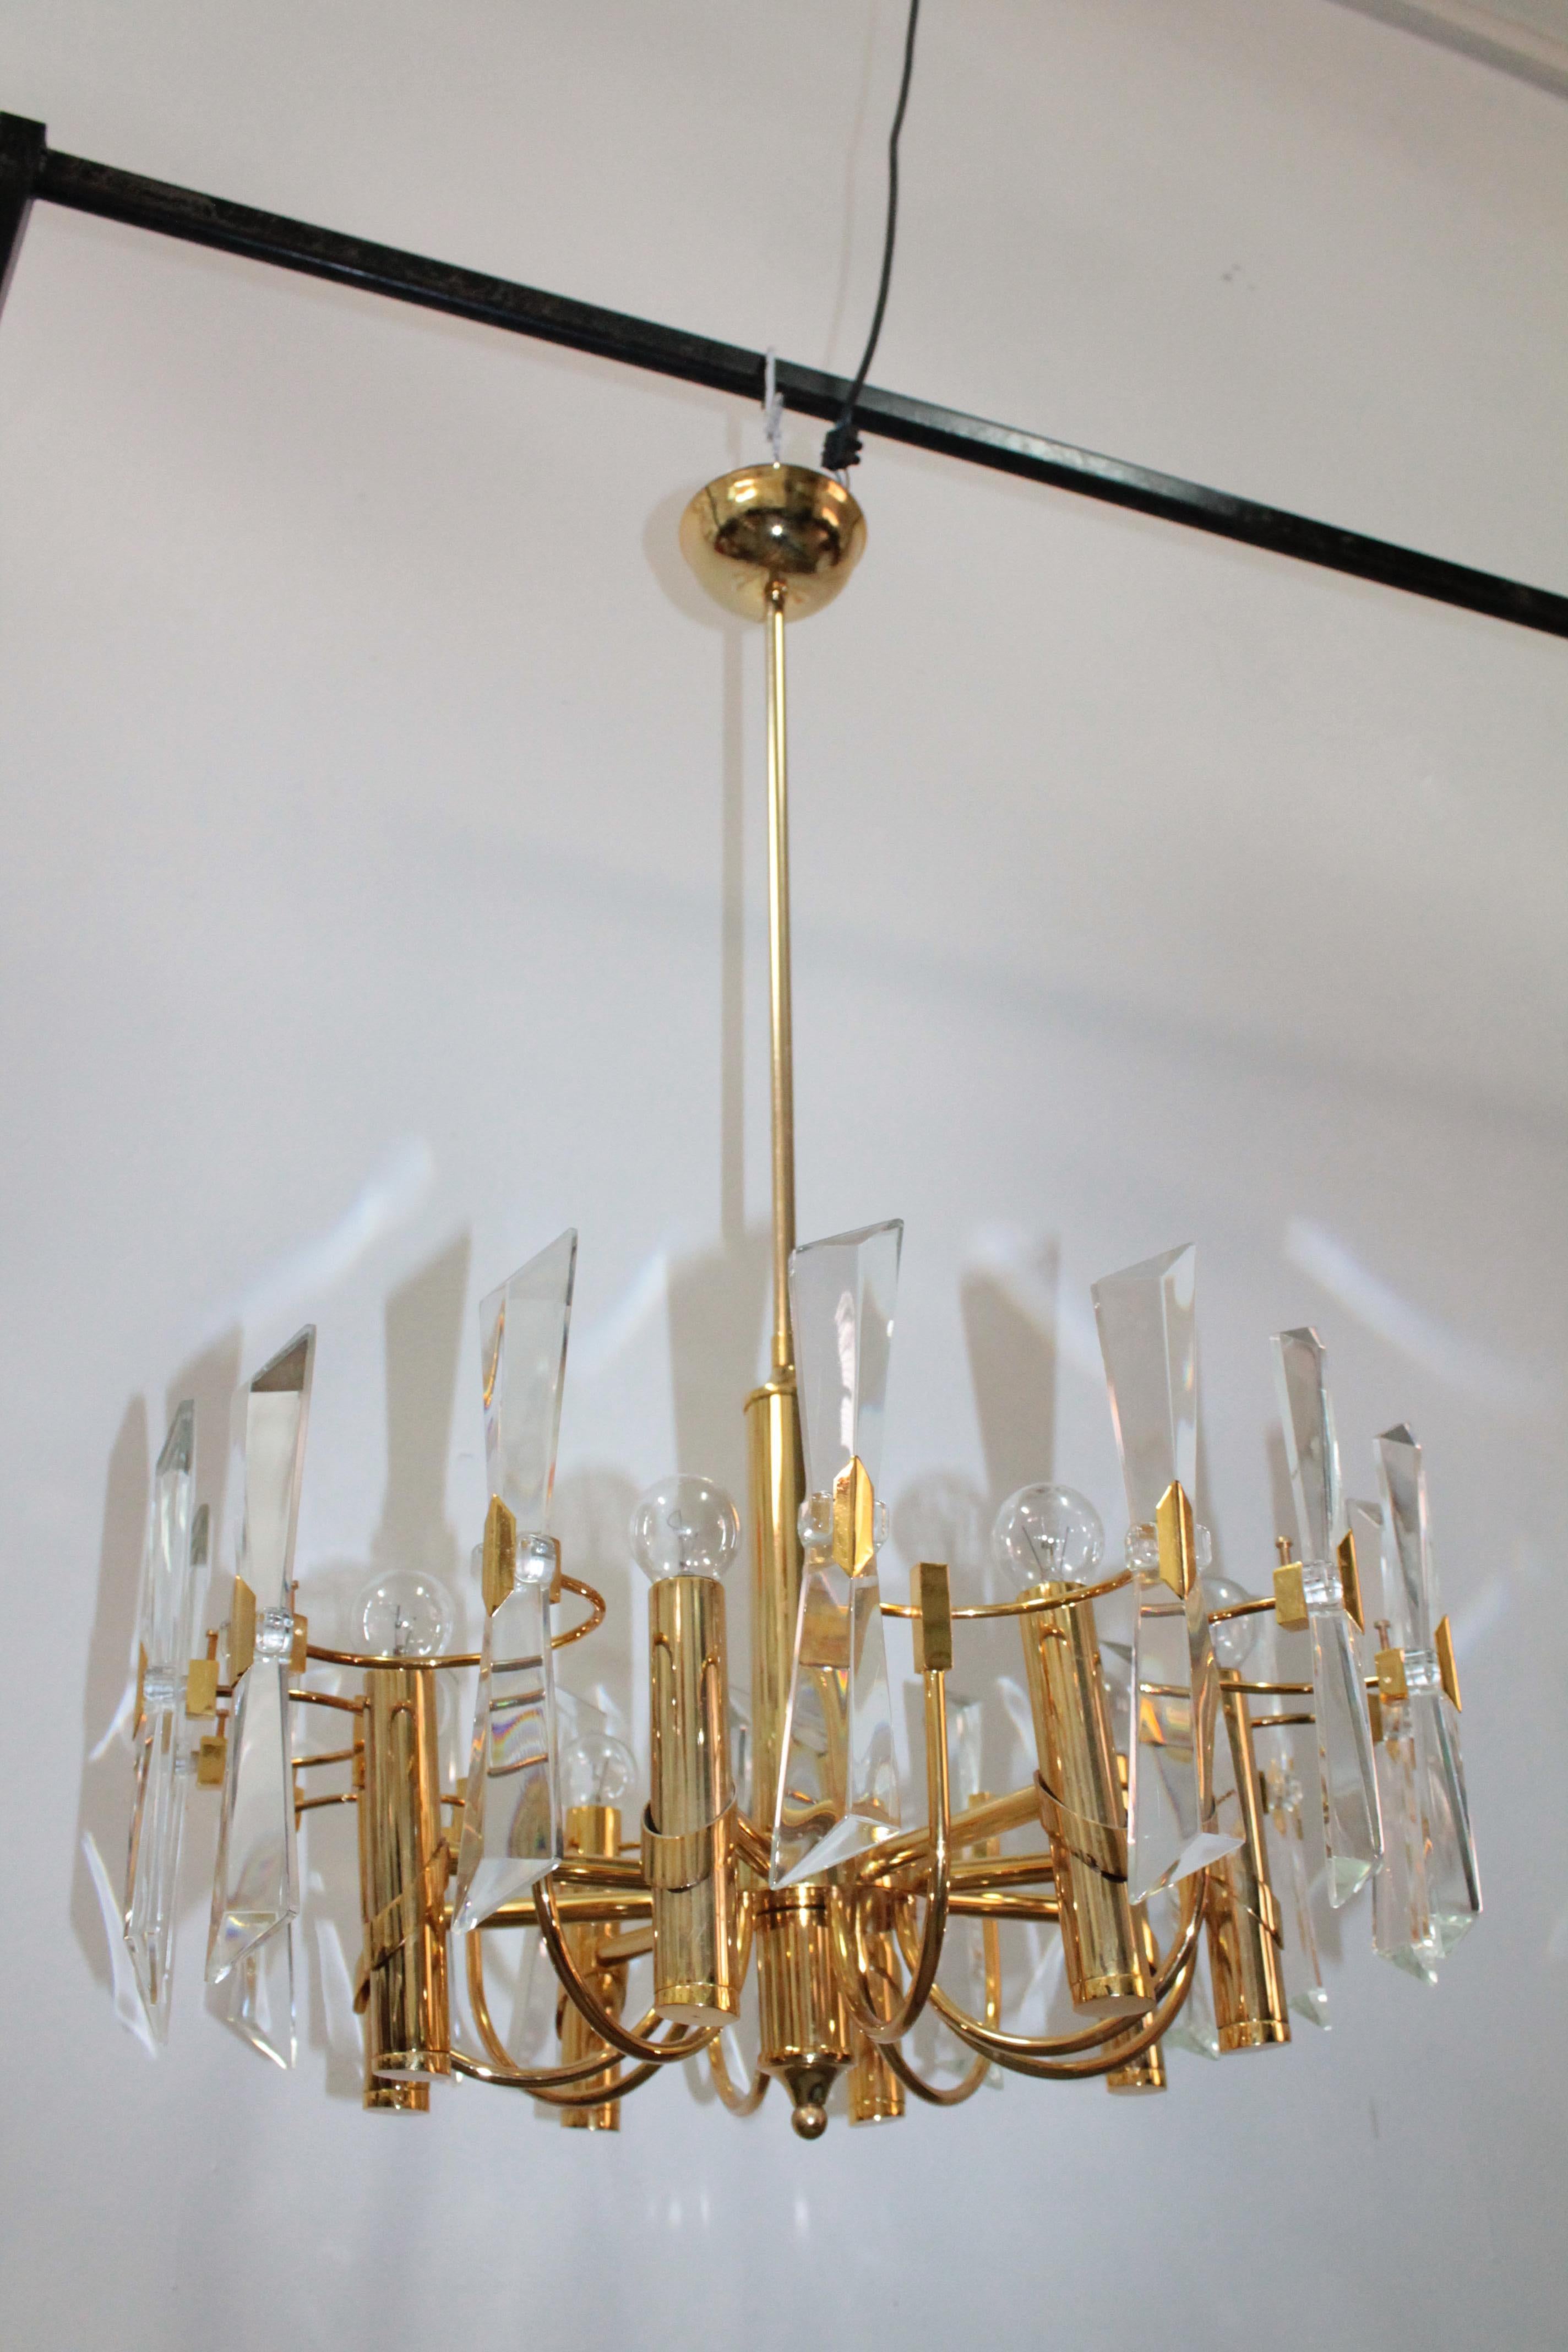 Modernist ceiling lamp gold-plated and crystals in good condition.
Attributed to Sciolari or Stilkronen.